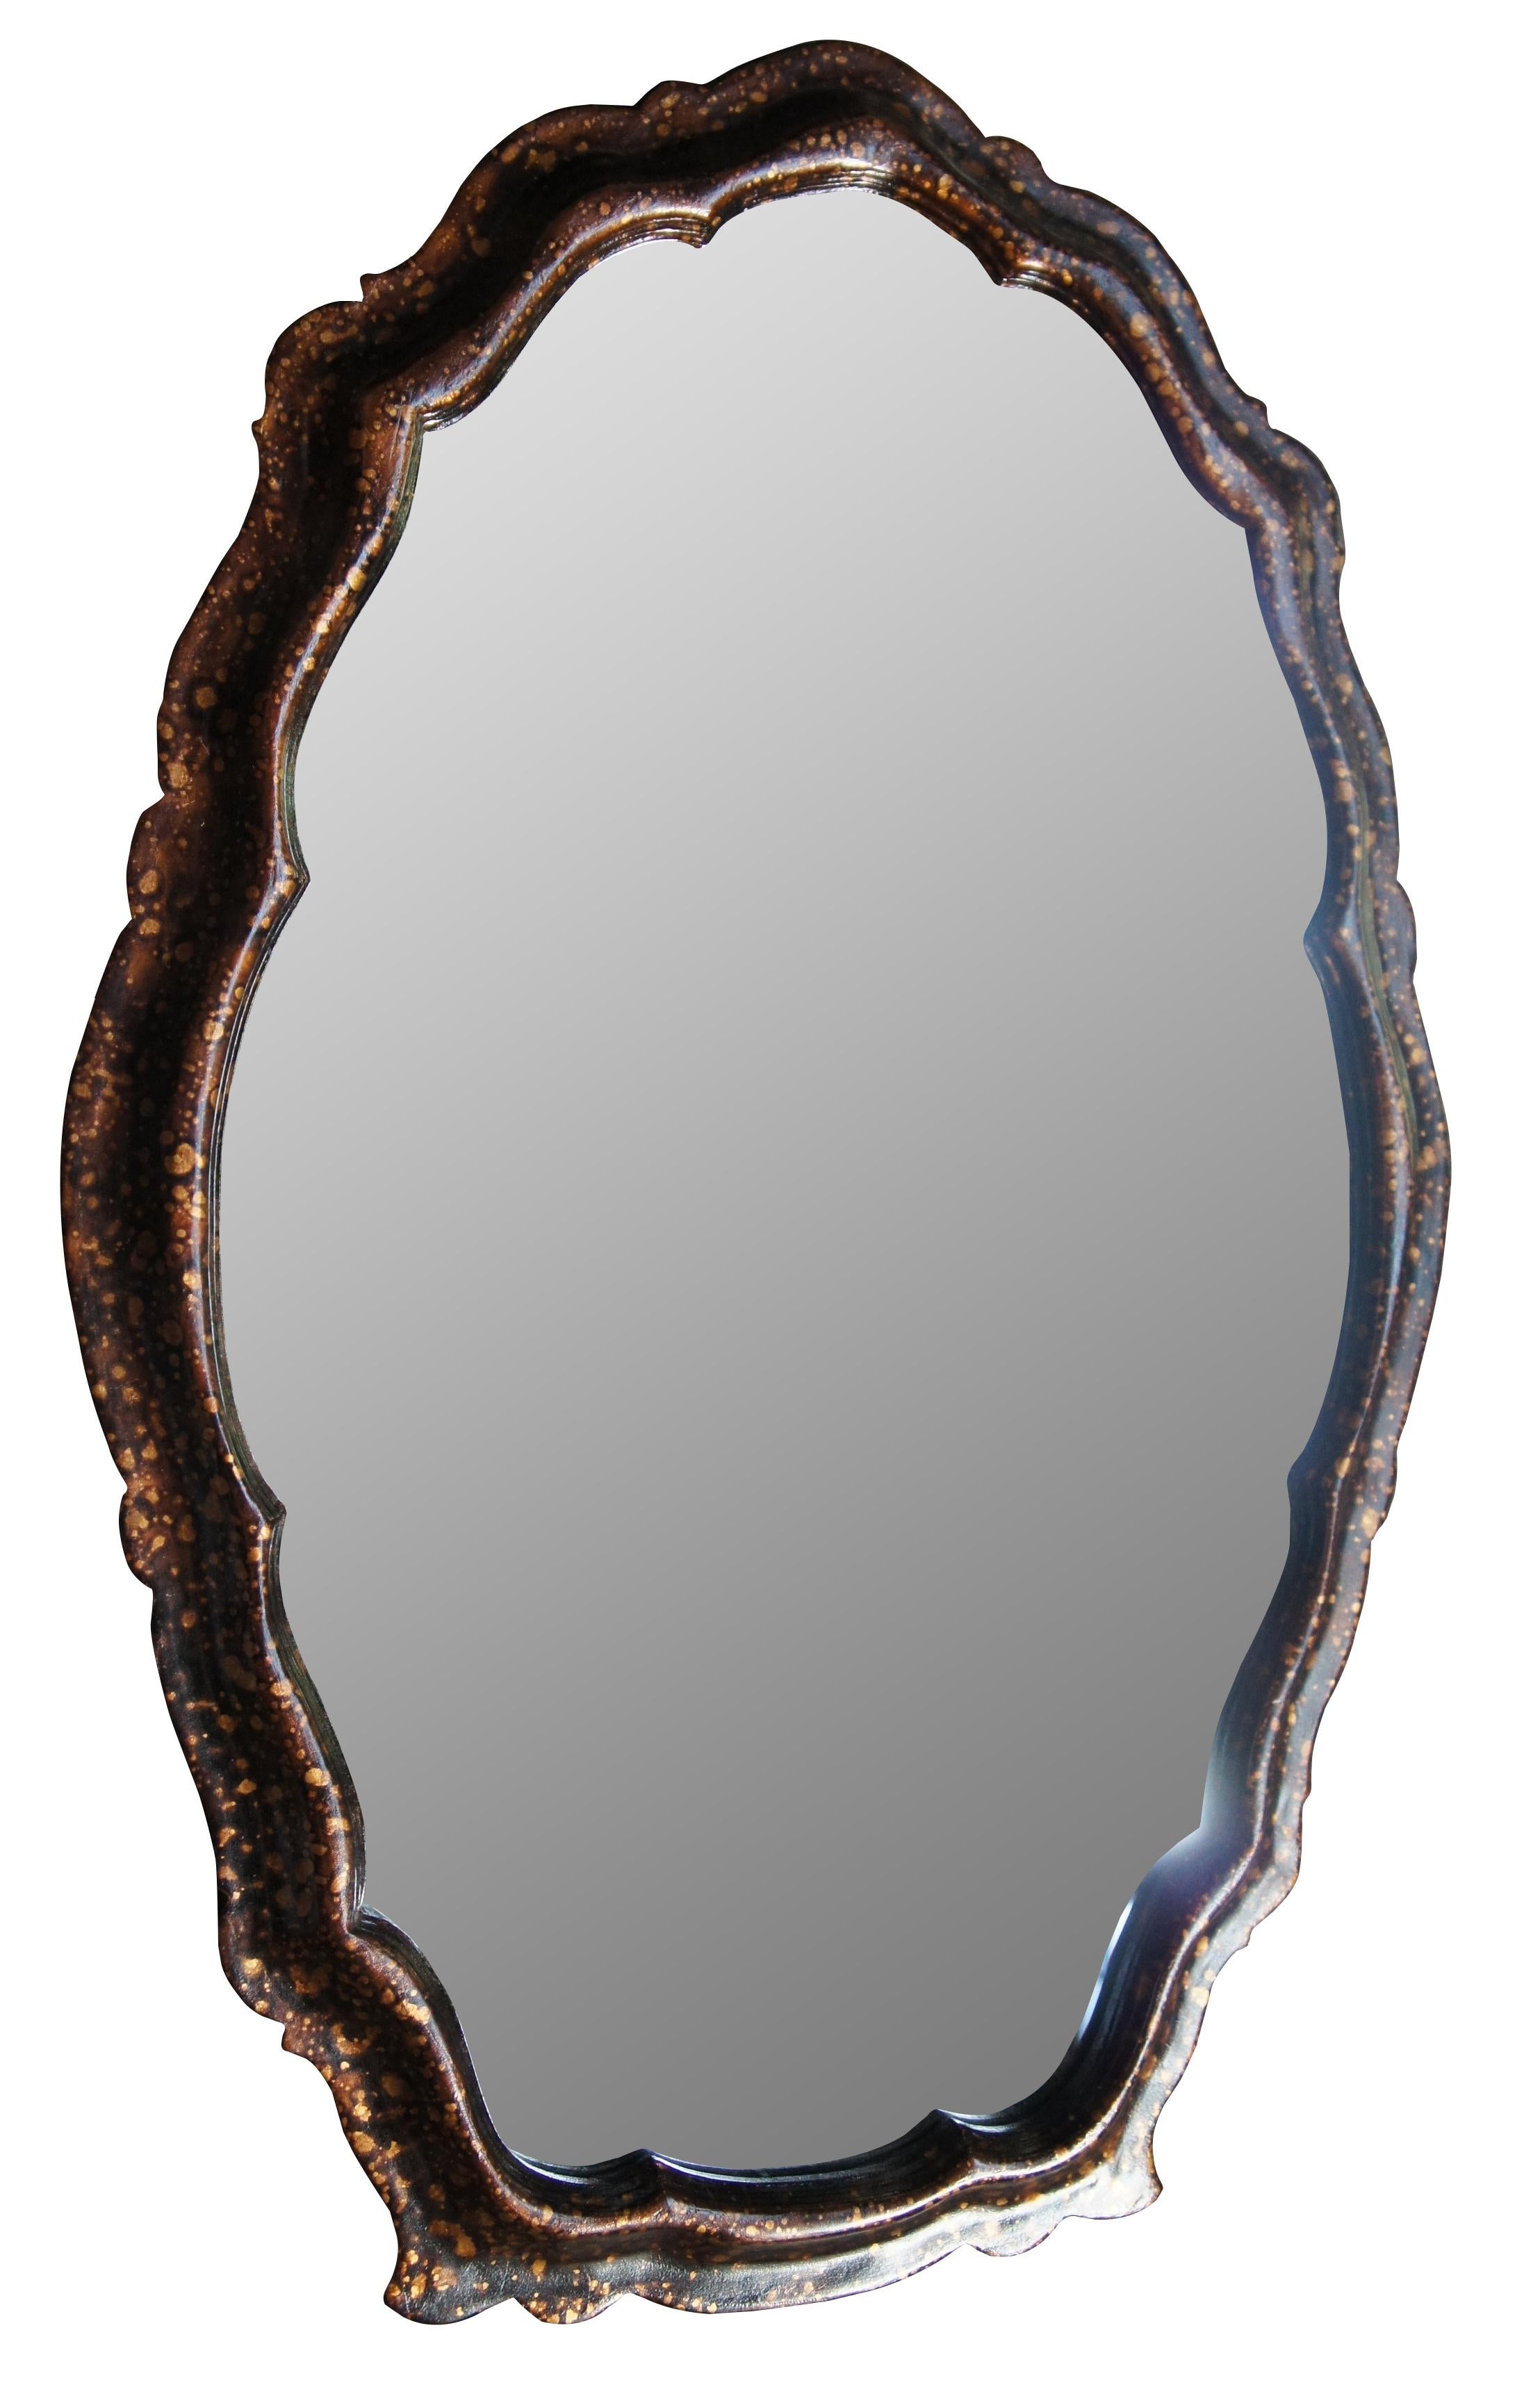 Vintage scalloped oval form wall hanging mirror featuring a painted tortoise shell finish in golds and browns.  Circa 1977